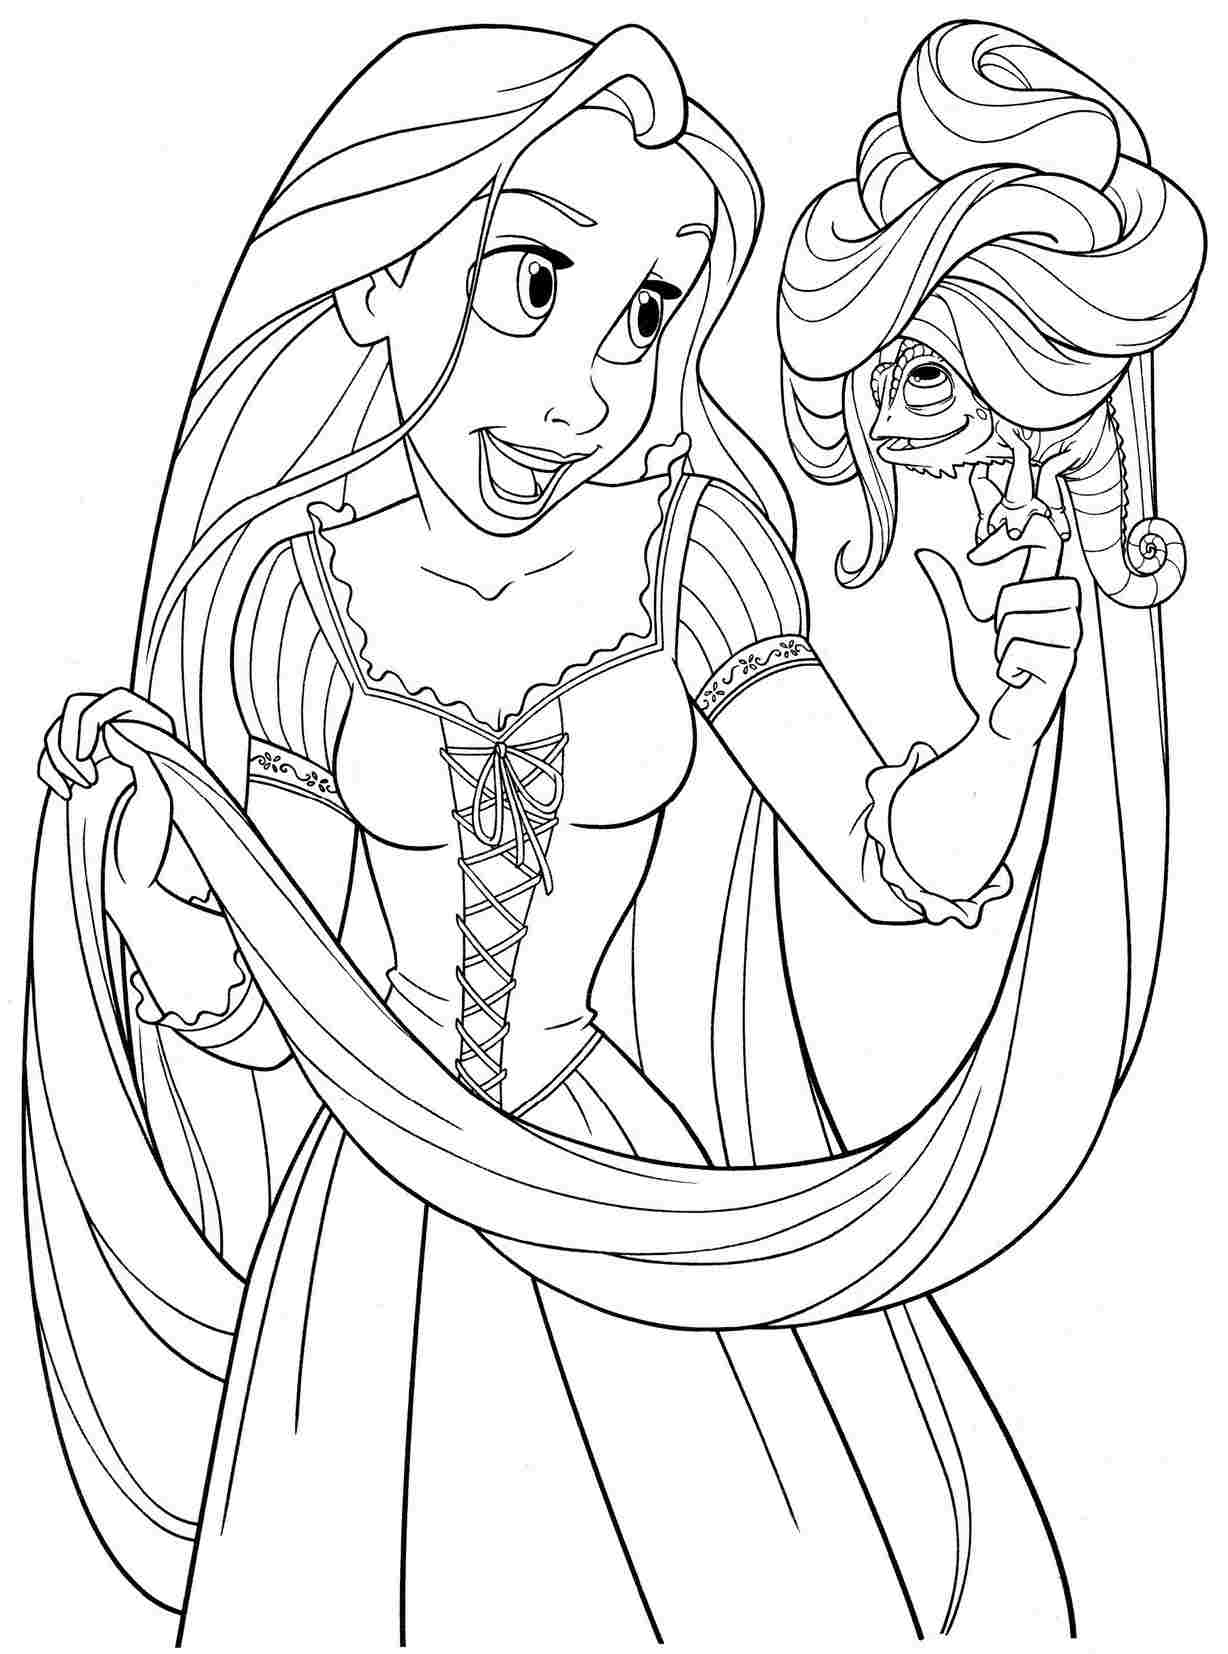 Rapunzel Printable Coloring Pages - Printable World Holiday